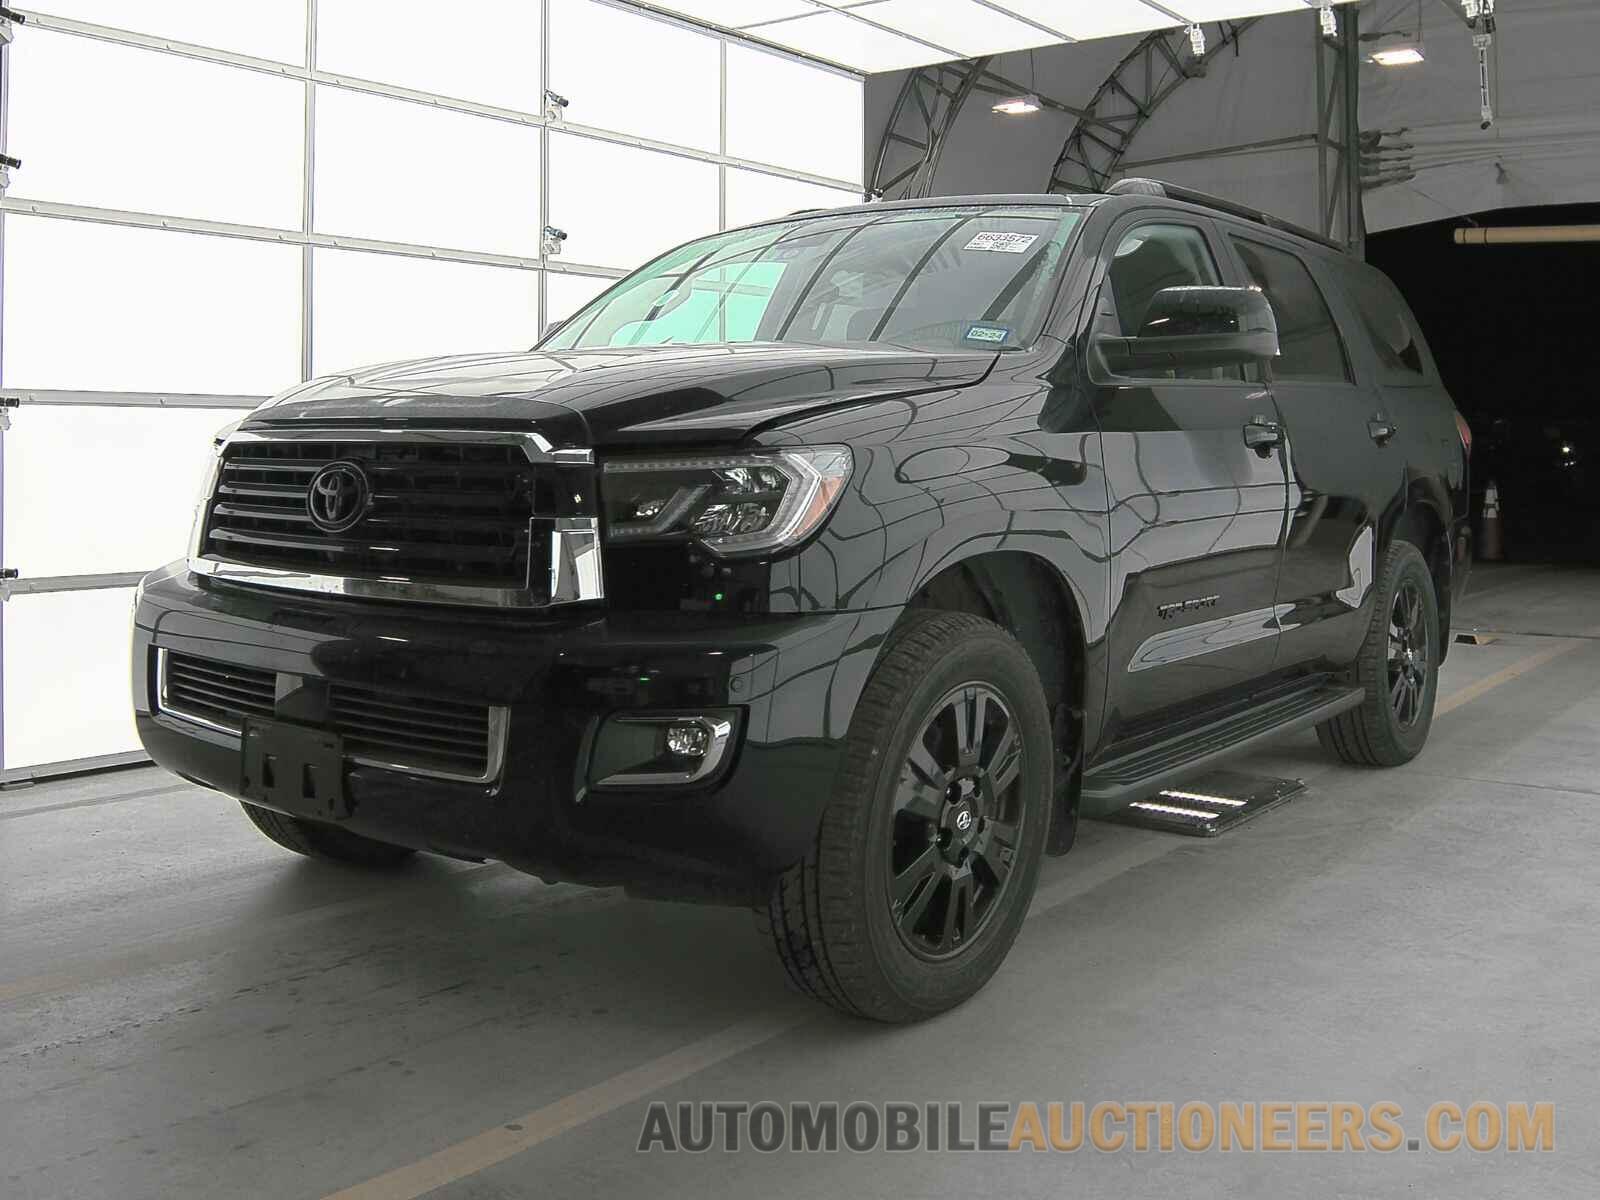 5TDCY5A11MS075822 Toyota Sequoia 2021